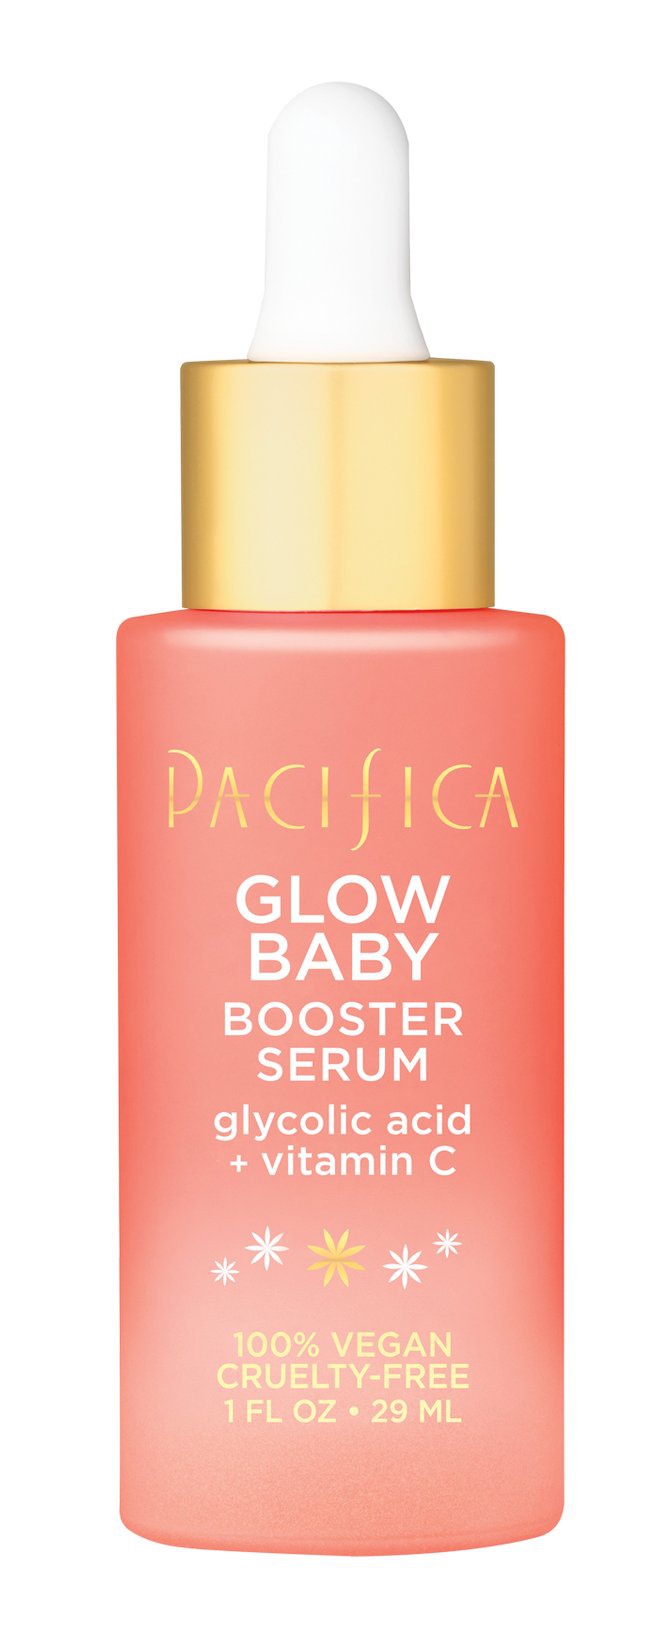 Pacifica Glow Baby Super Lit Booster Serum